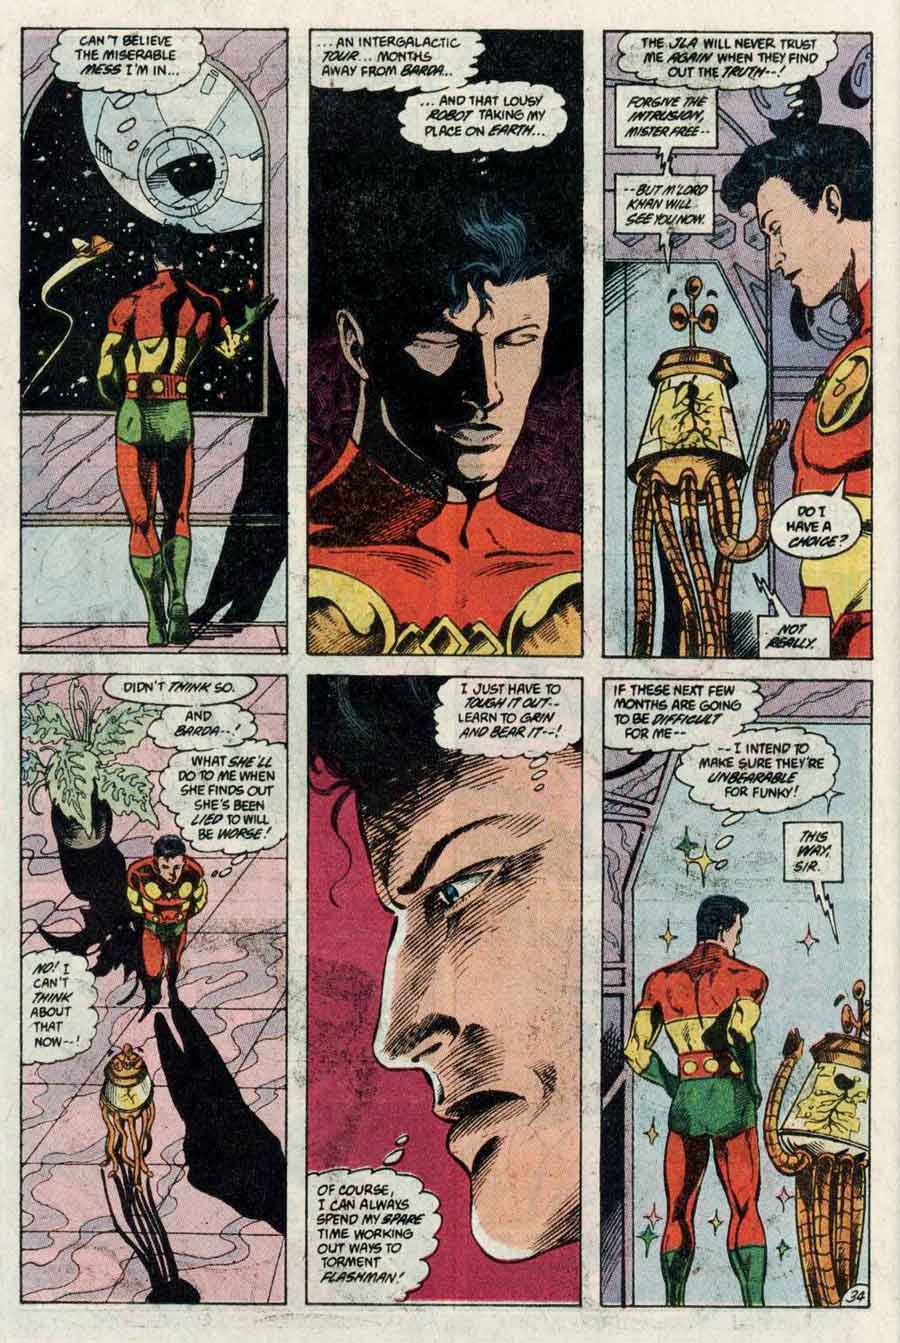 Justice League International Special #1 by Keith Giffen, Len Wein, Joe Phillips and Bruce D Patterson